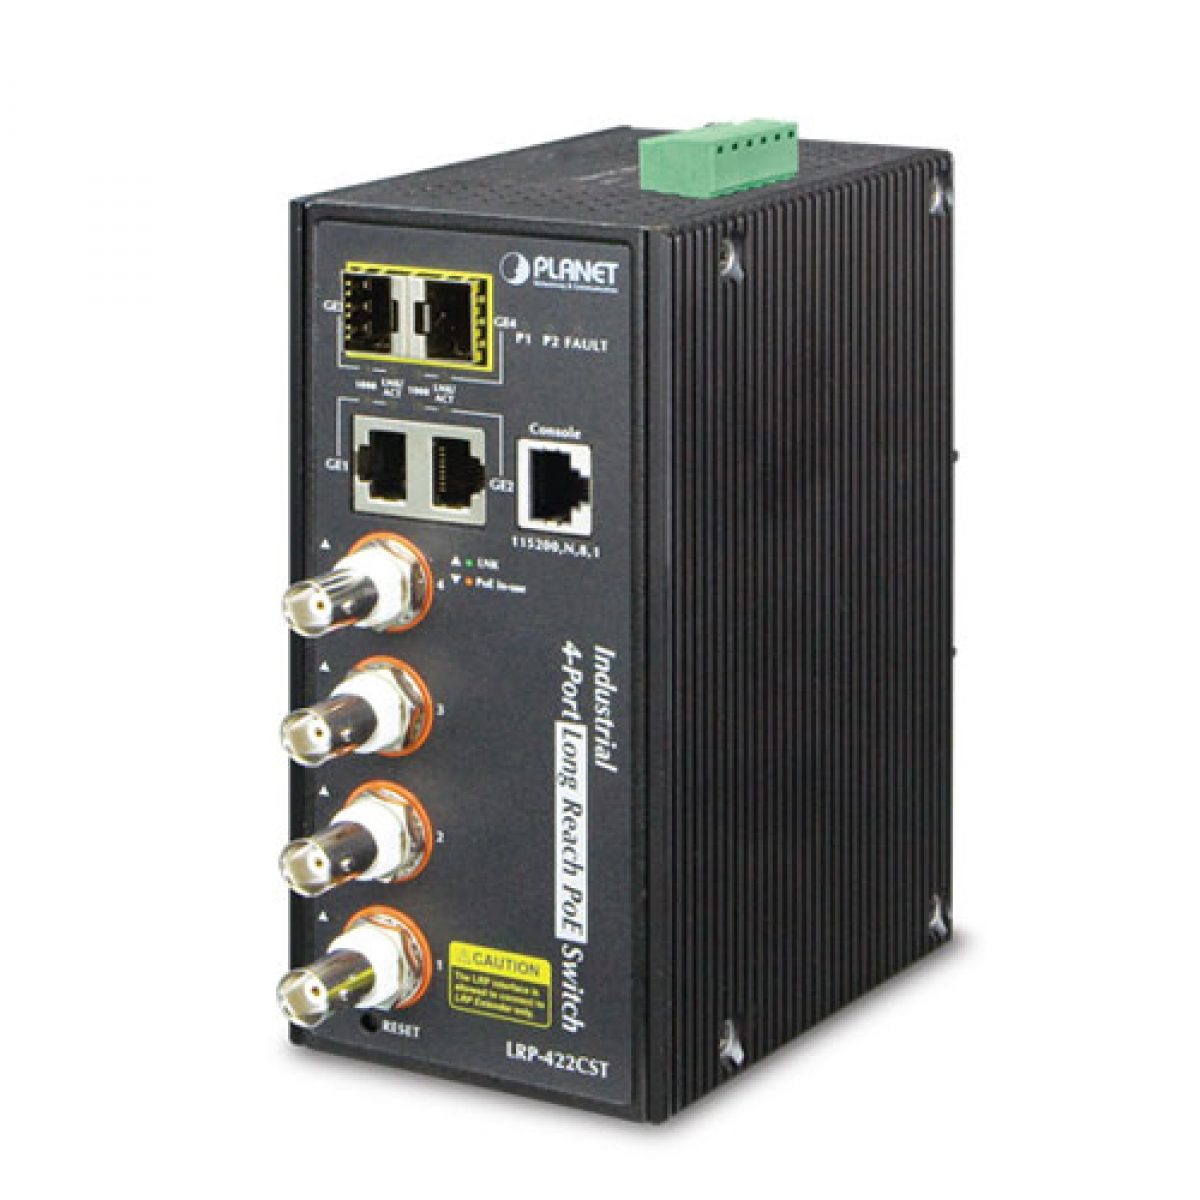 Ethernet Switch Kit with 4 Port BNC and 1 Port RJ45